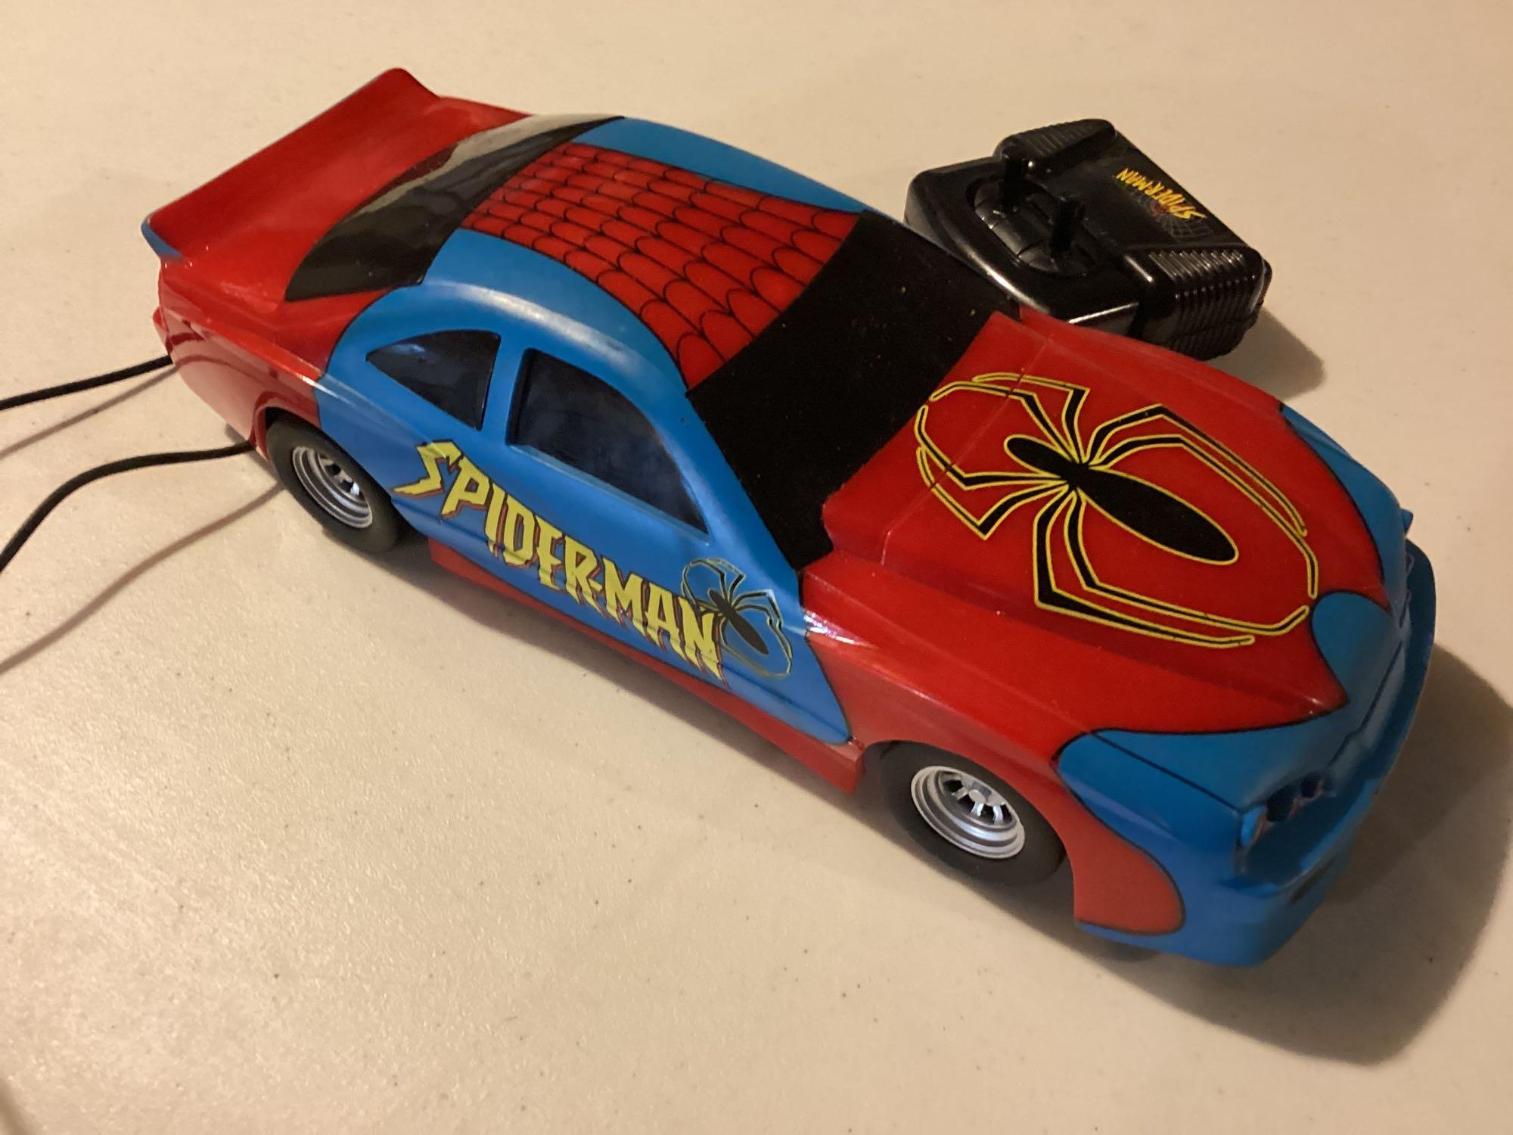 Image for 2003 RC Spider-Man Car